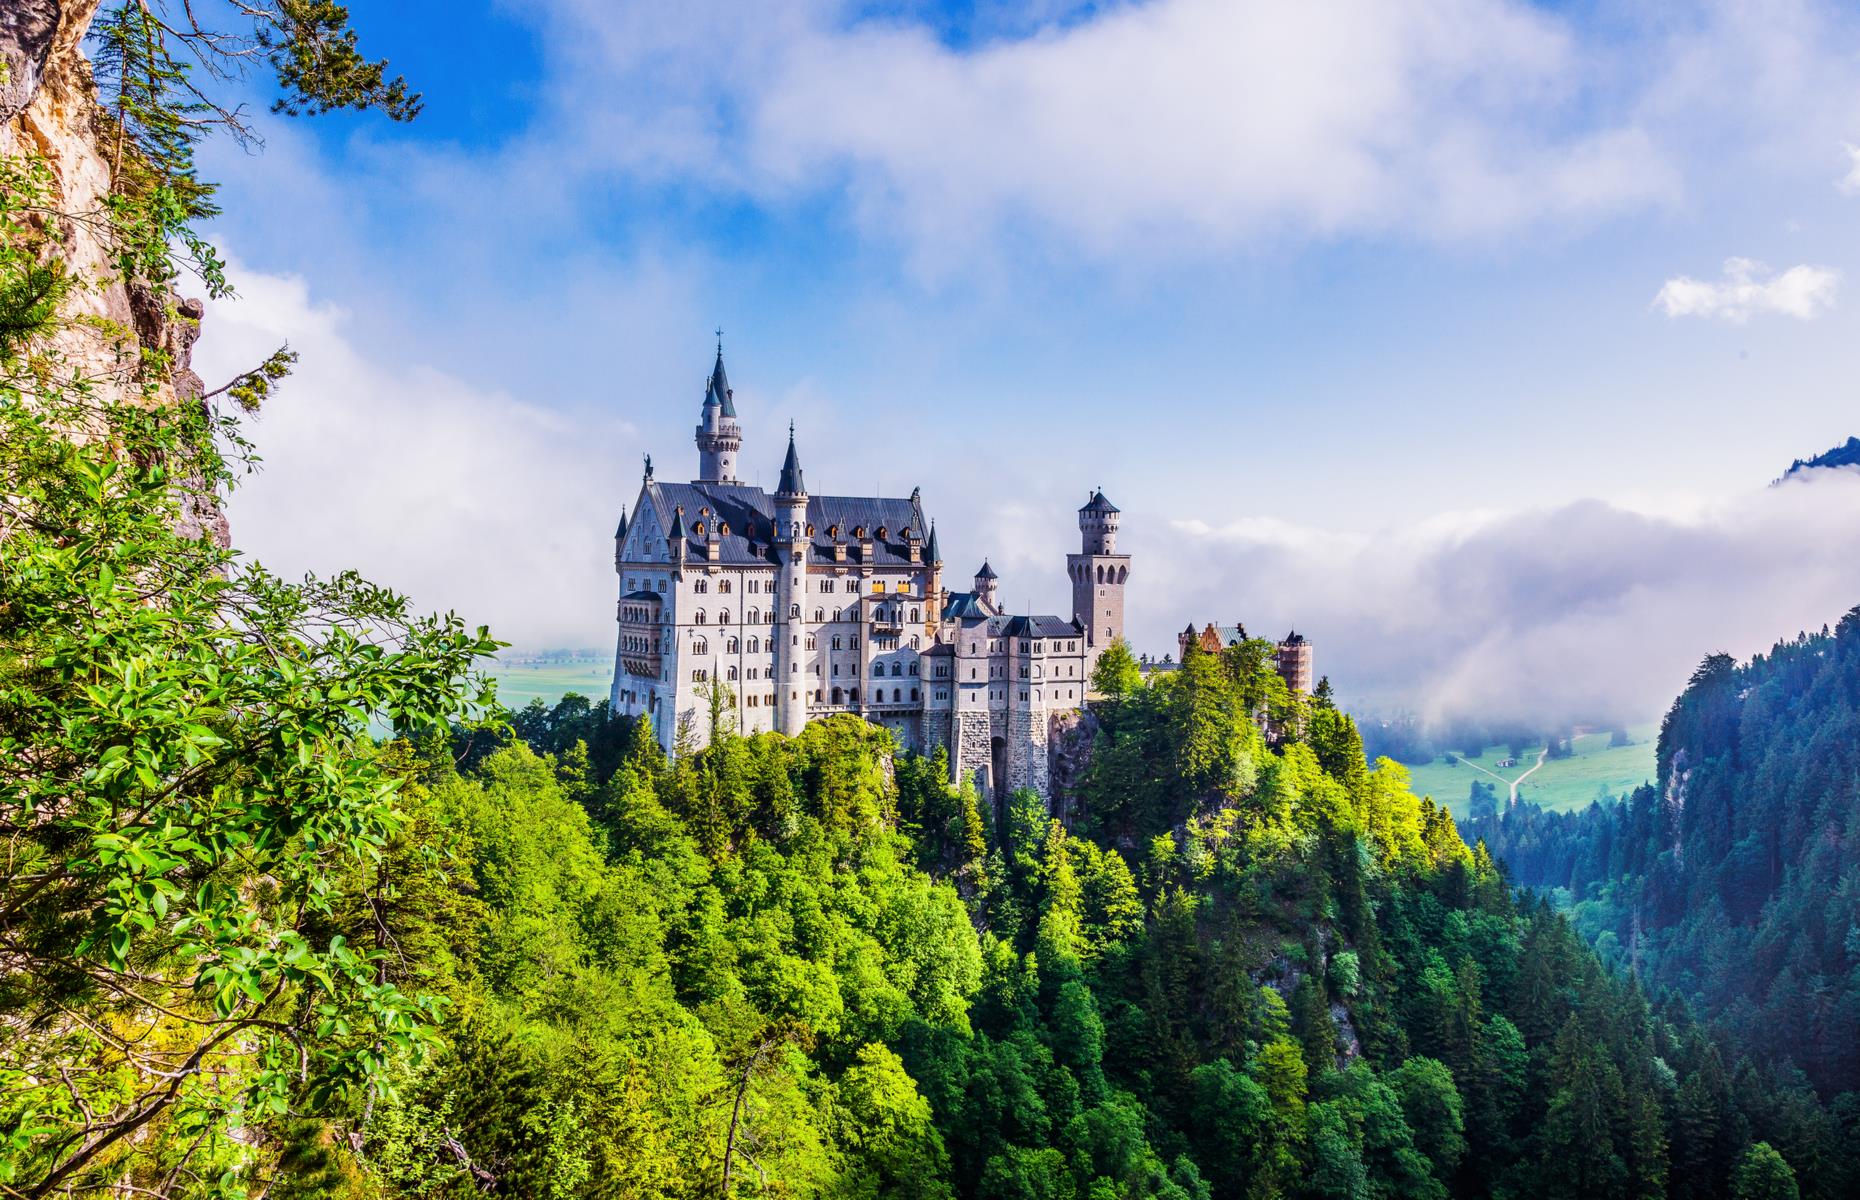 <p>One of the route’s most spectacular sights is actually right at the end, near the Bavarian town of Füssen, and it links this journey with another spectacular road trip – the Alpine route or Alpenstraße. Bavarian King Ludwig II’s 19th-century Neuschwanstein Castle (pictured) is so ethereal and picture-perfect that it’s believed to have inspired Walt Disney’s Sleeping Beauty castle. Nearby Hohenschwangau Castle, the king’s childhood residence, is equally lavish.</p>